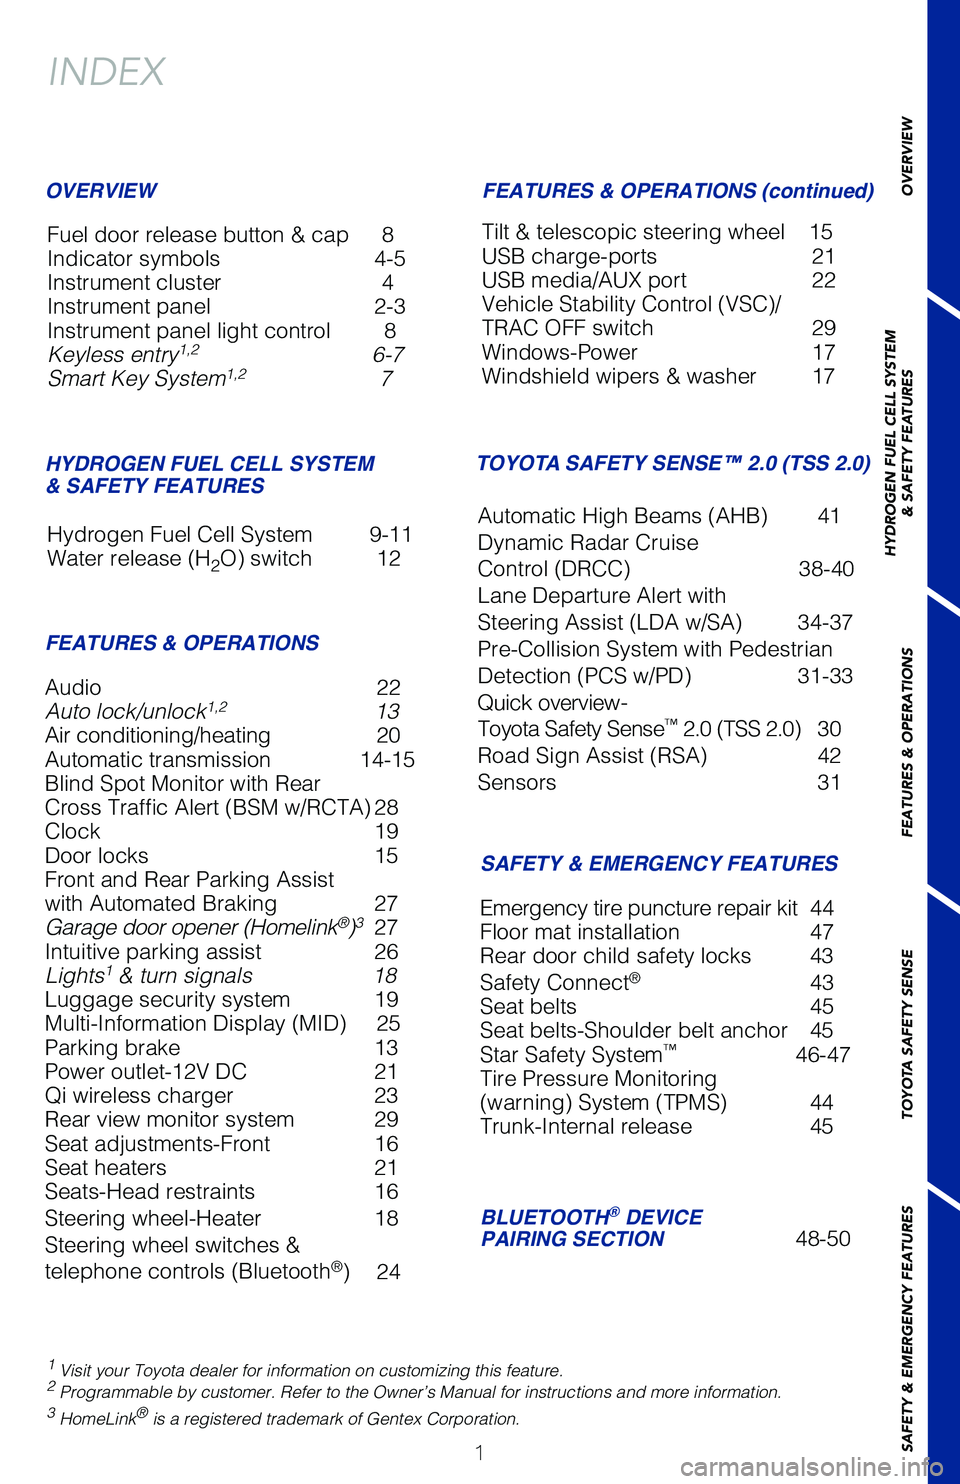 TOYOTA MIRAI 2020  Owners Manual (in English) 1
OVERVIEW
HYDROGEN FUEL CELL SYSTEM
& SAFETY FEATURES
FEATURES & OPERATIONS
TOYOTA SAFETY SENSE
SAFETY & EMERGENCY FEATURES
Audio 22
Auto lock/unlock1,213
Air conditioning/heating   20
Automatic tran